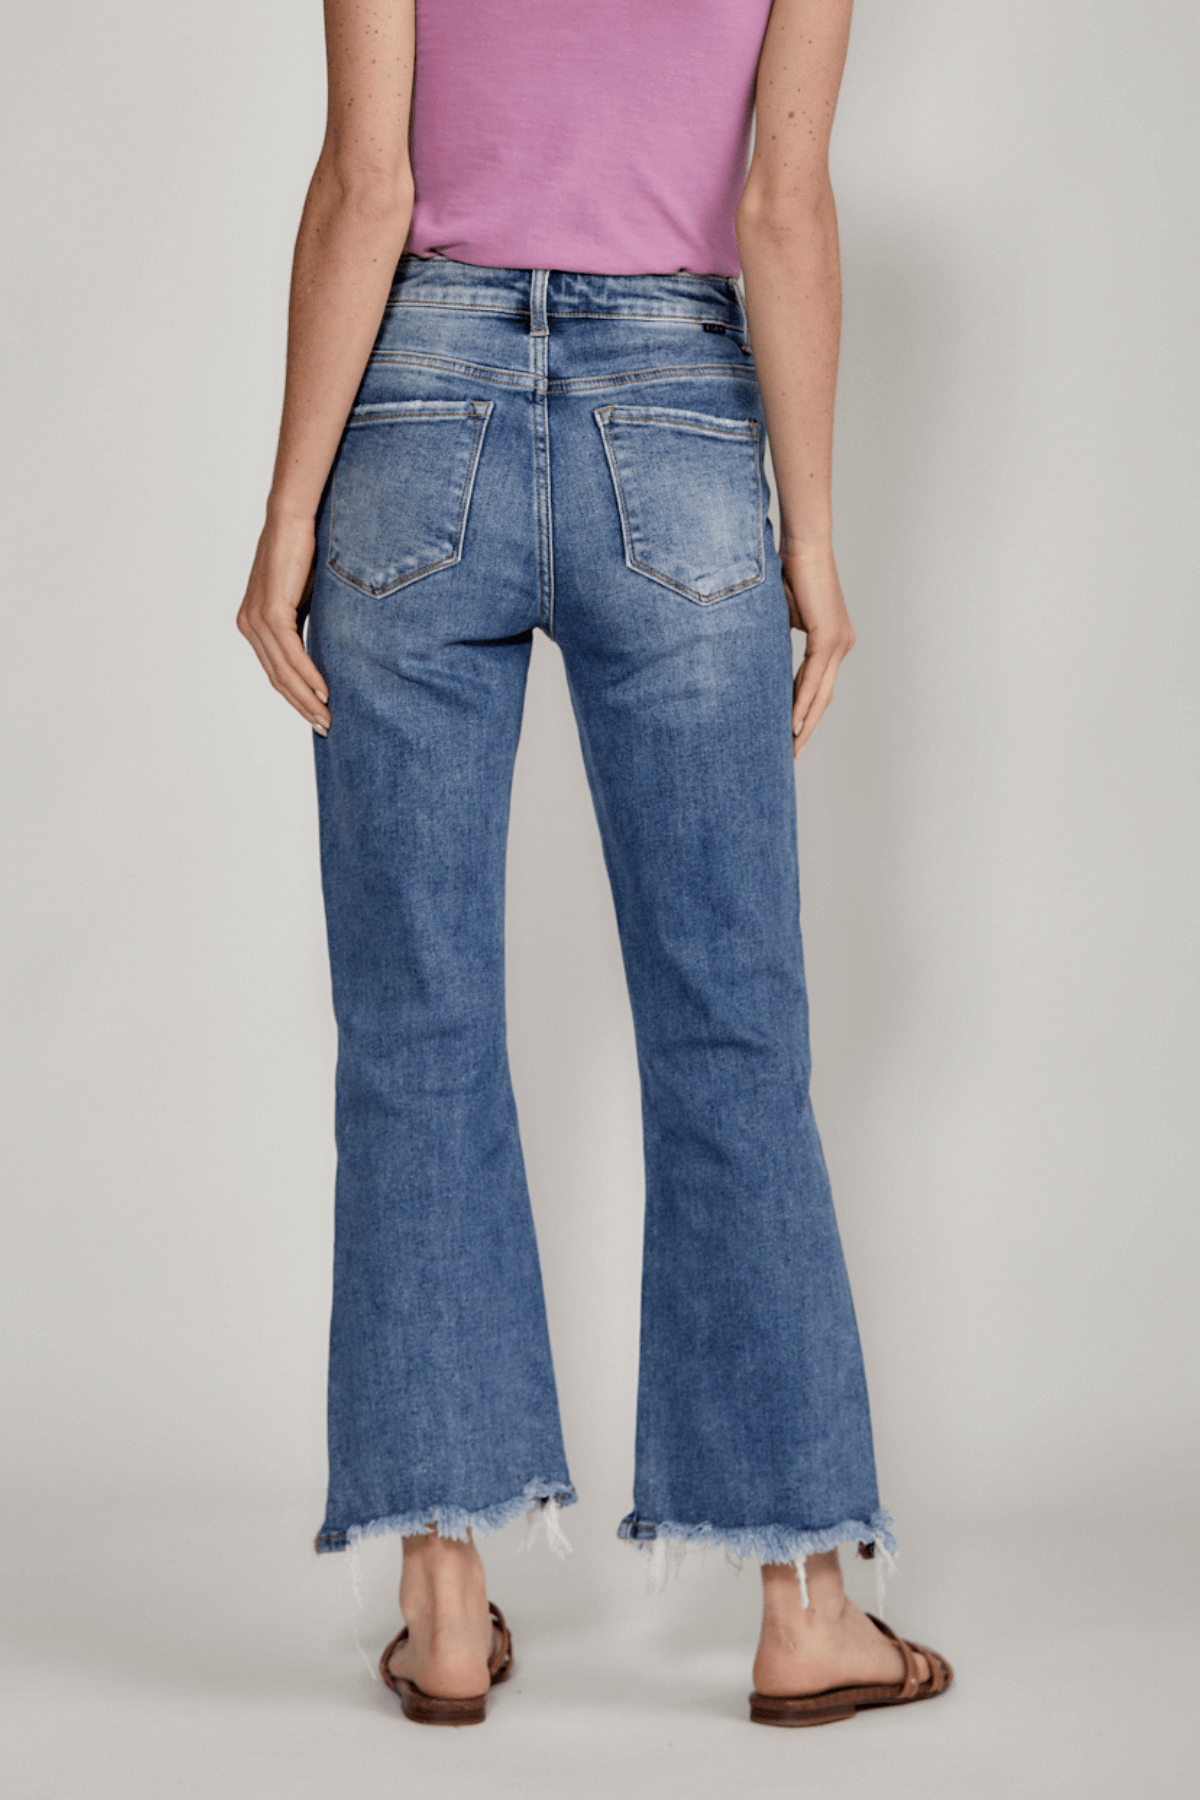 Risen Paige High Rise Distressed Kick Flare Jeans